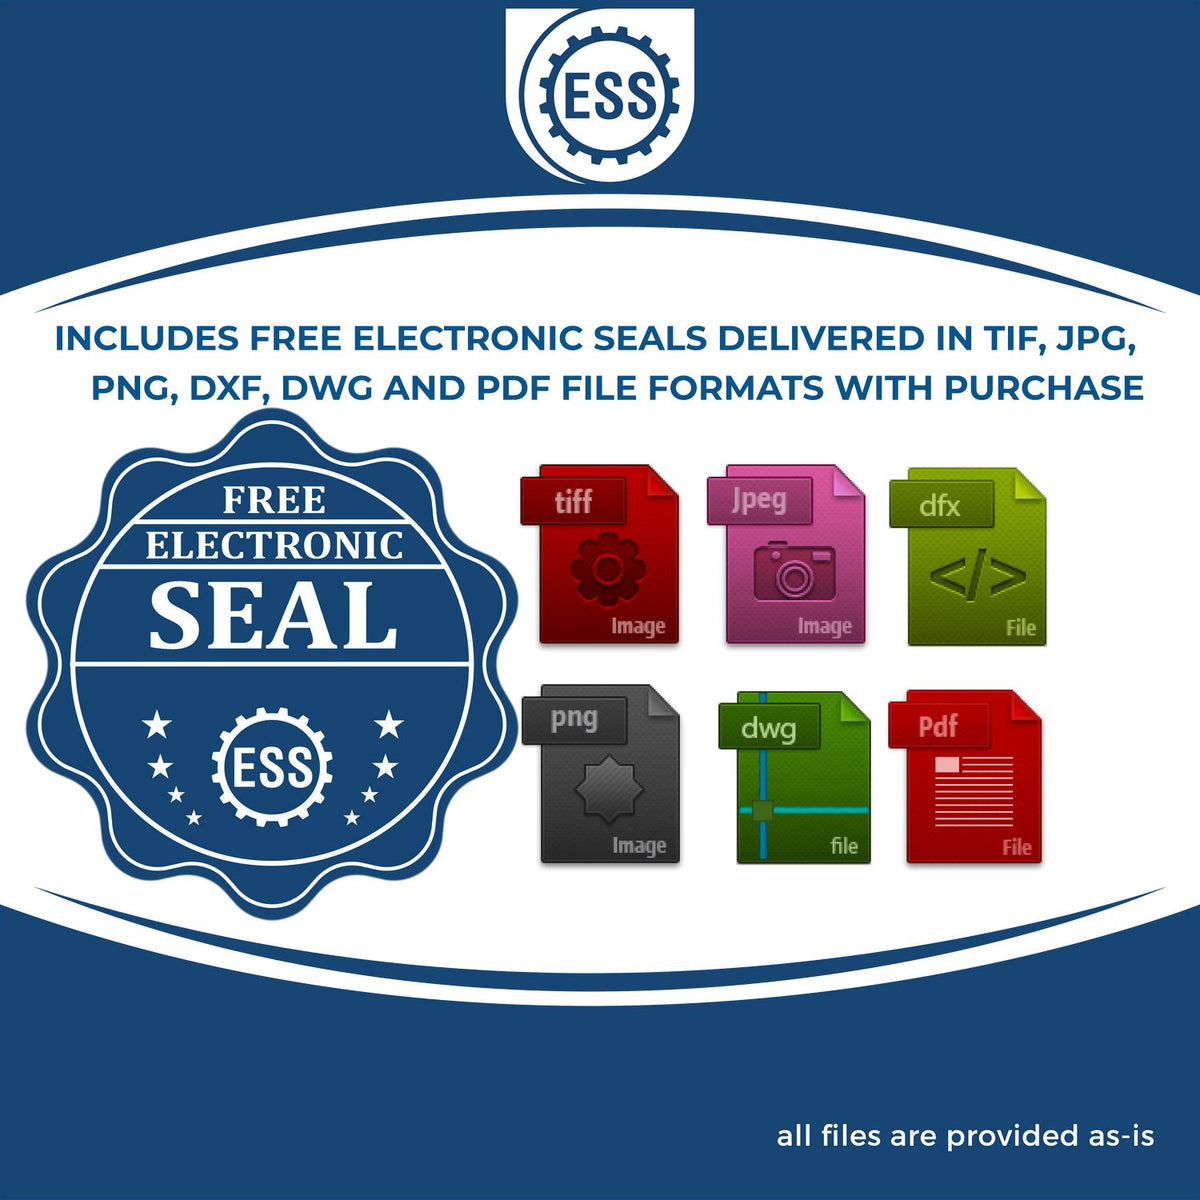 An infographic for the free electronic seal for the Hybrid South Dakota Land Surveyor Seal illustrating the different file type icons such as DXF, DWG, TIF, JPG and PNG.